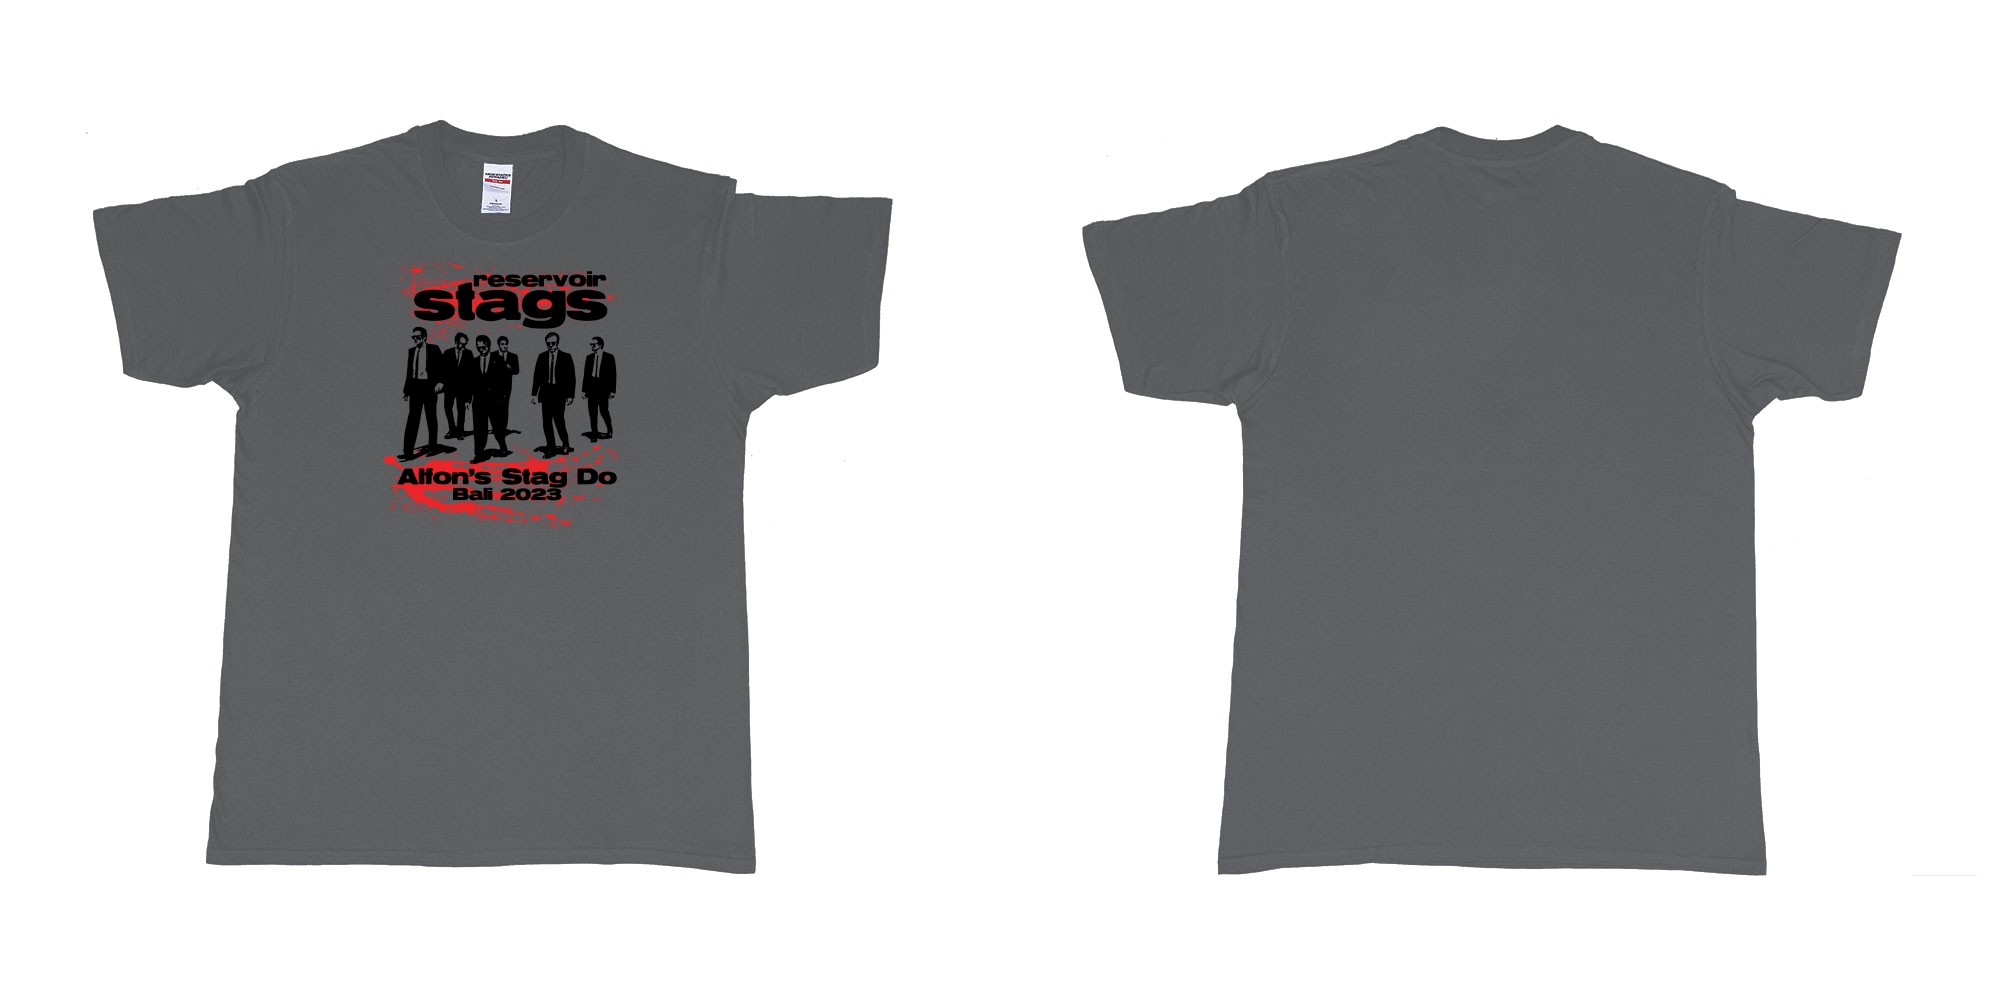 Custom tshirt design Reservoir Dogs Stag in fabric color charcoal choice your own text made in Bali by The Pirate Way